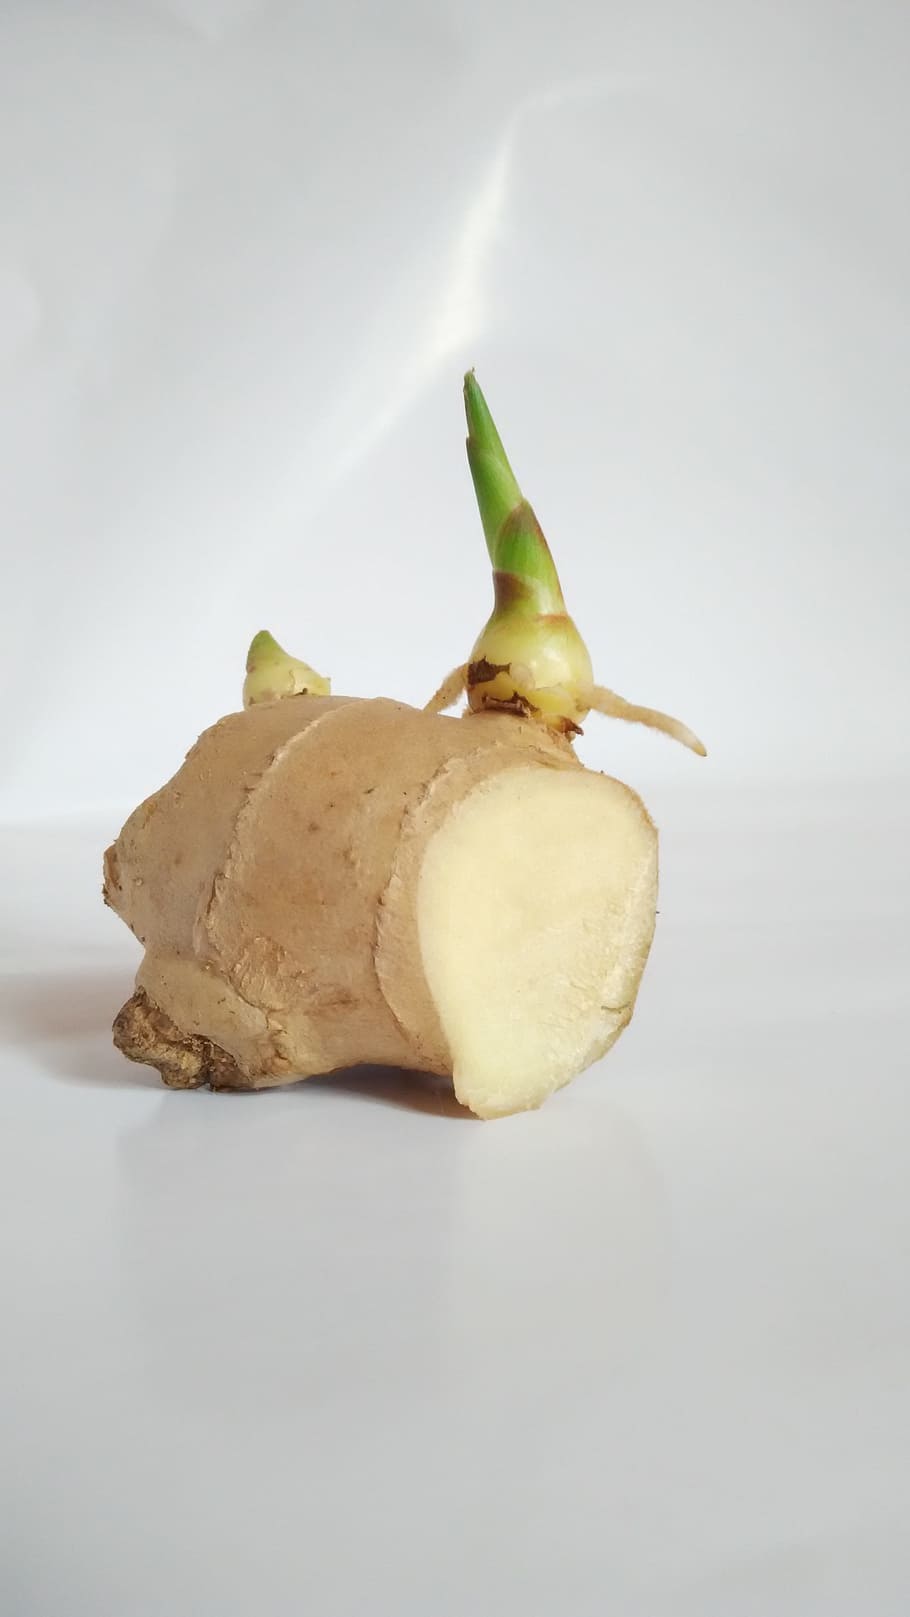 Ginger, Germination, ginger sprout, studio shot, food and drink, white background, food, freshness, indoors, still life